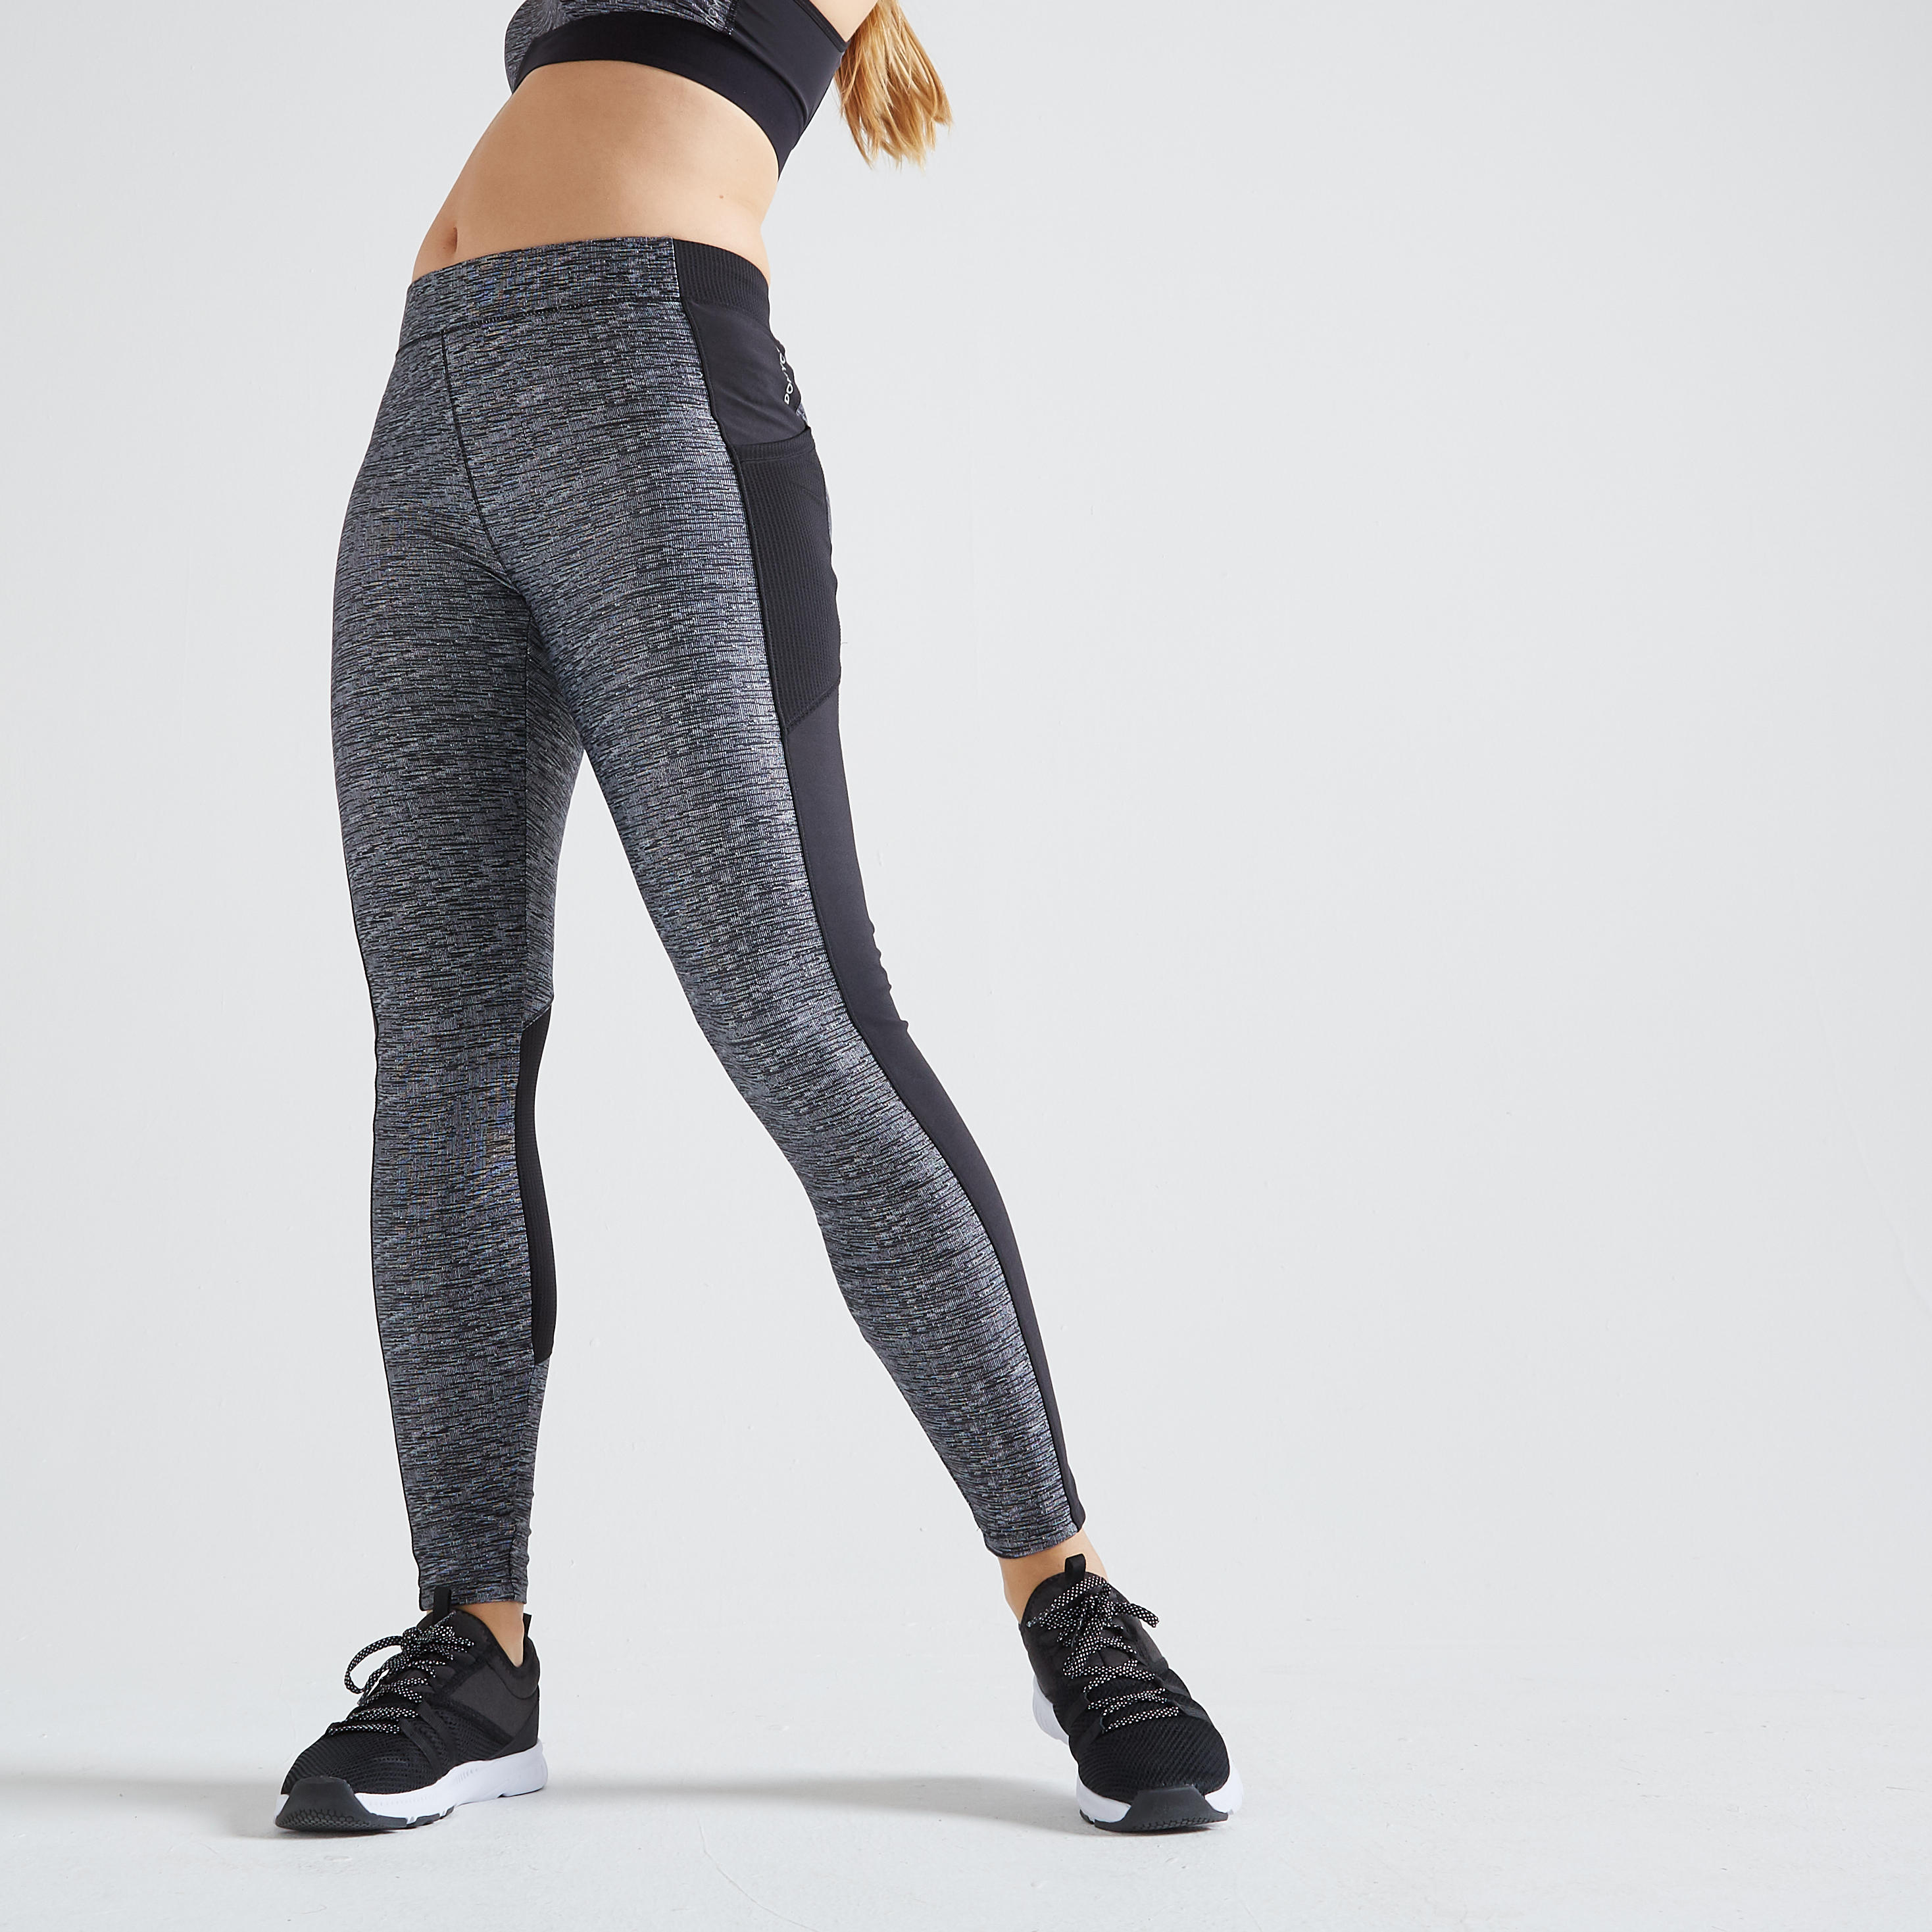 Decathlon Running Leggings Review | International Society of Precision  Agriculture